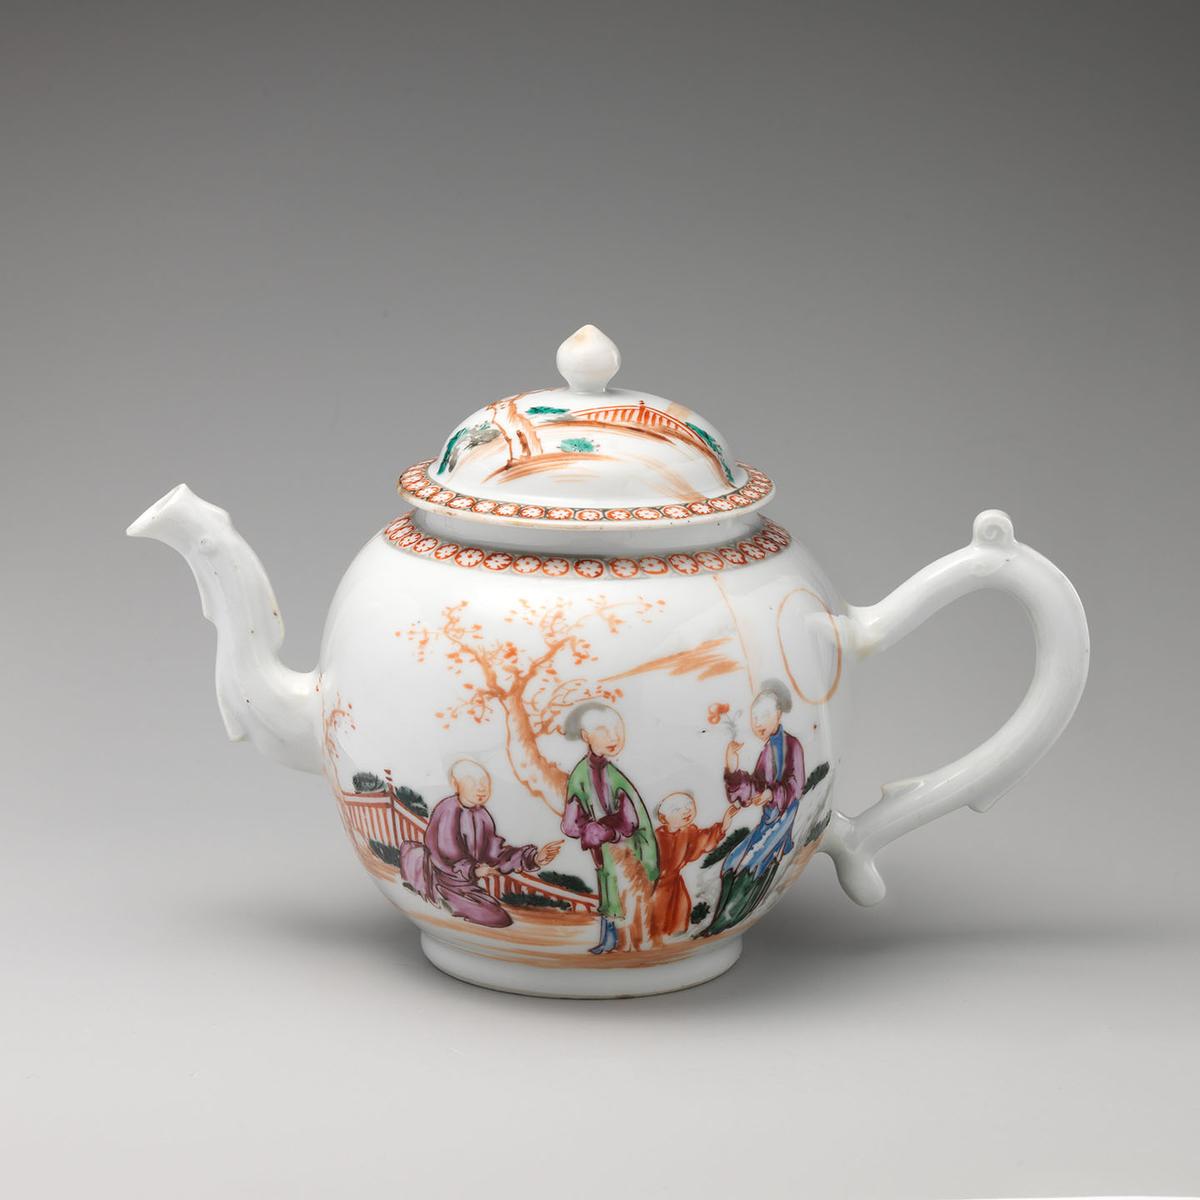 Chinese teapot for the European market, circa 1770. Hard-paste porcelain with enamel decoration; 6 3/16 inches. The Metropolitan Museum of Art, New York City. (Public Domain)